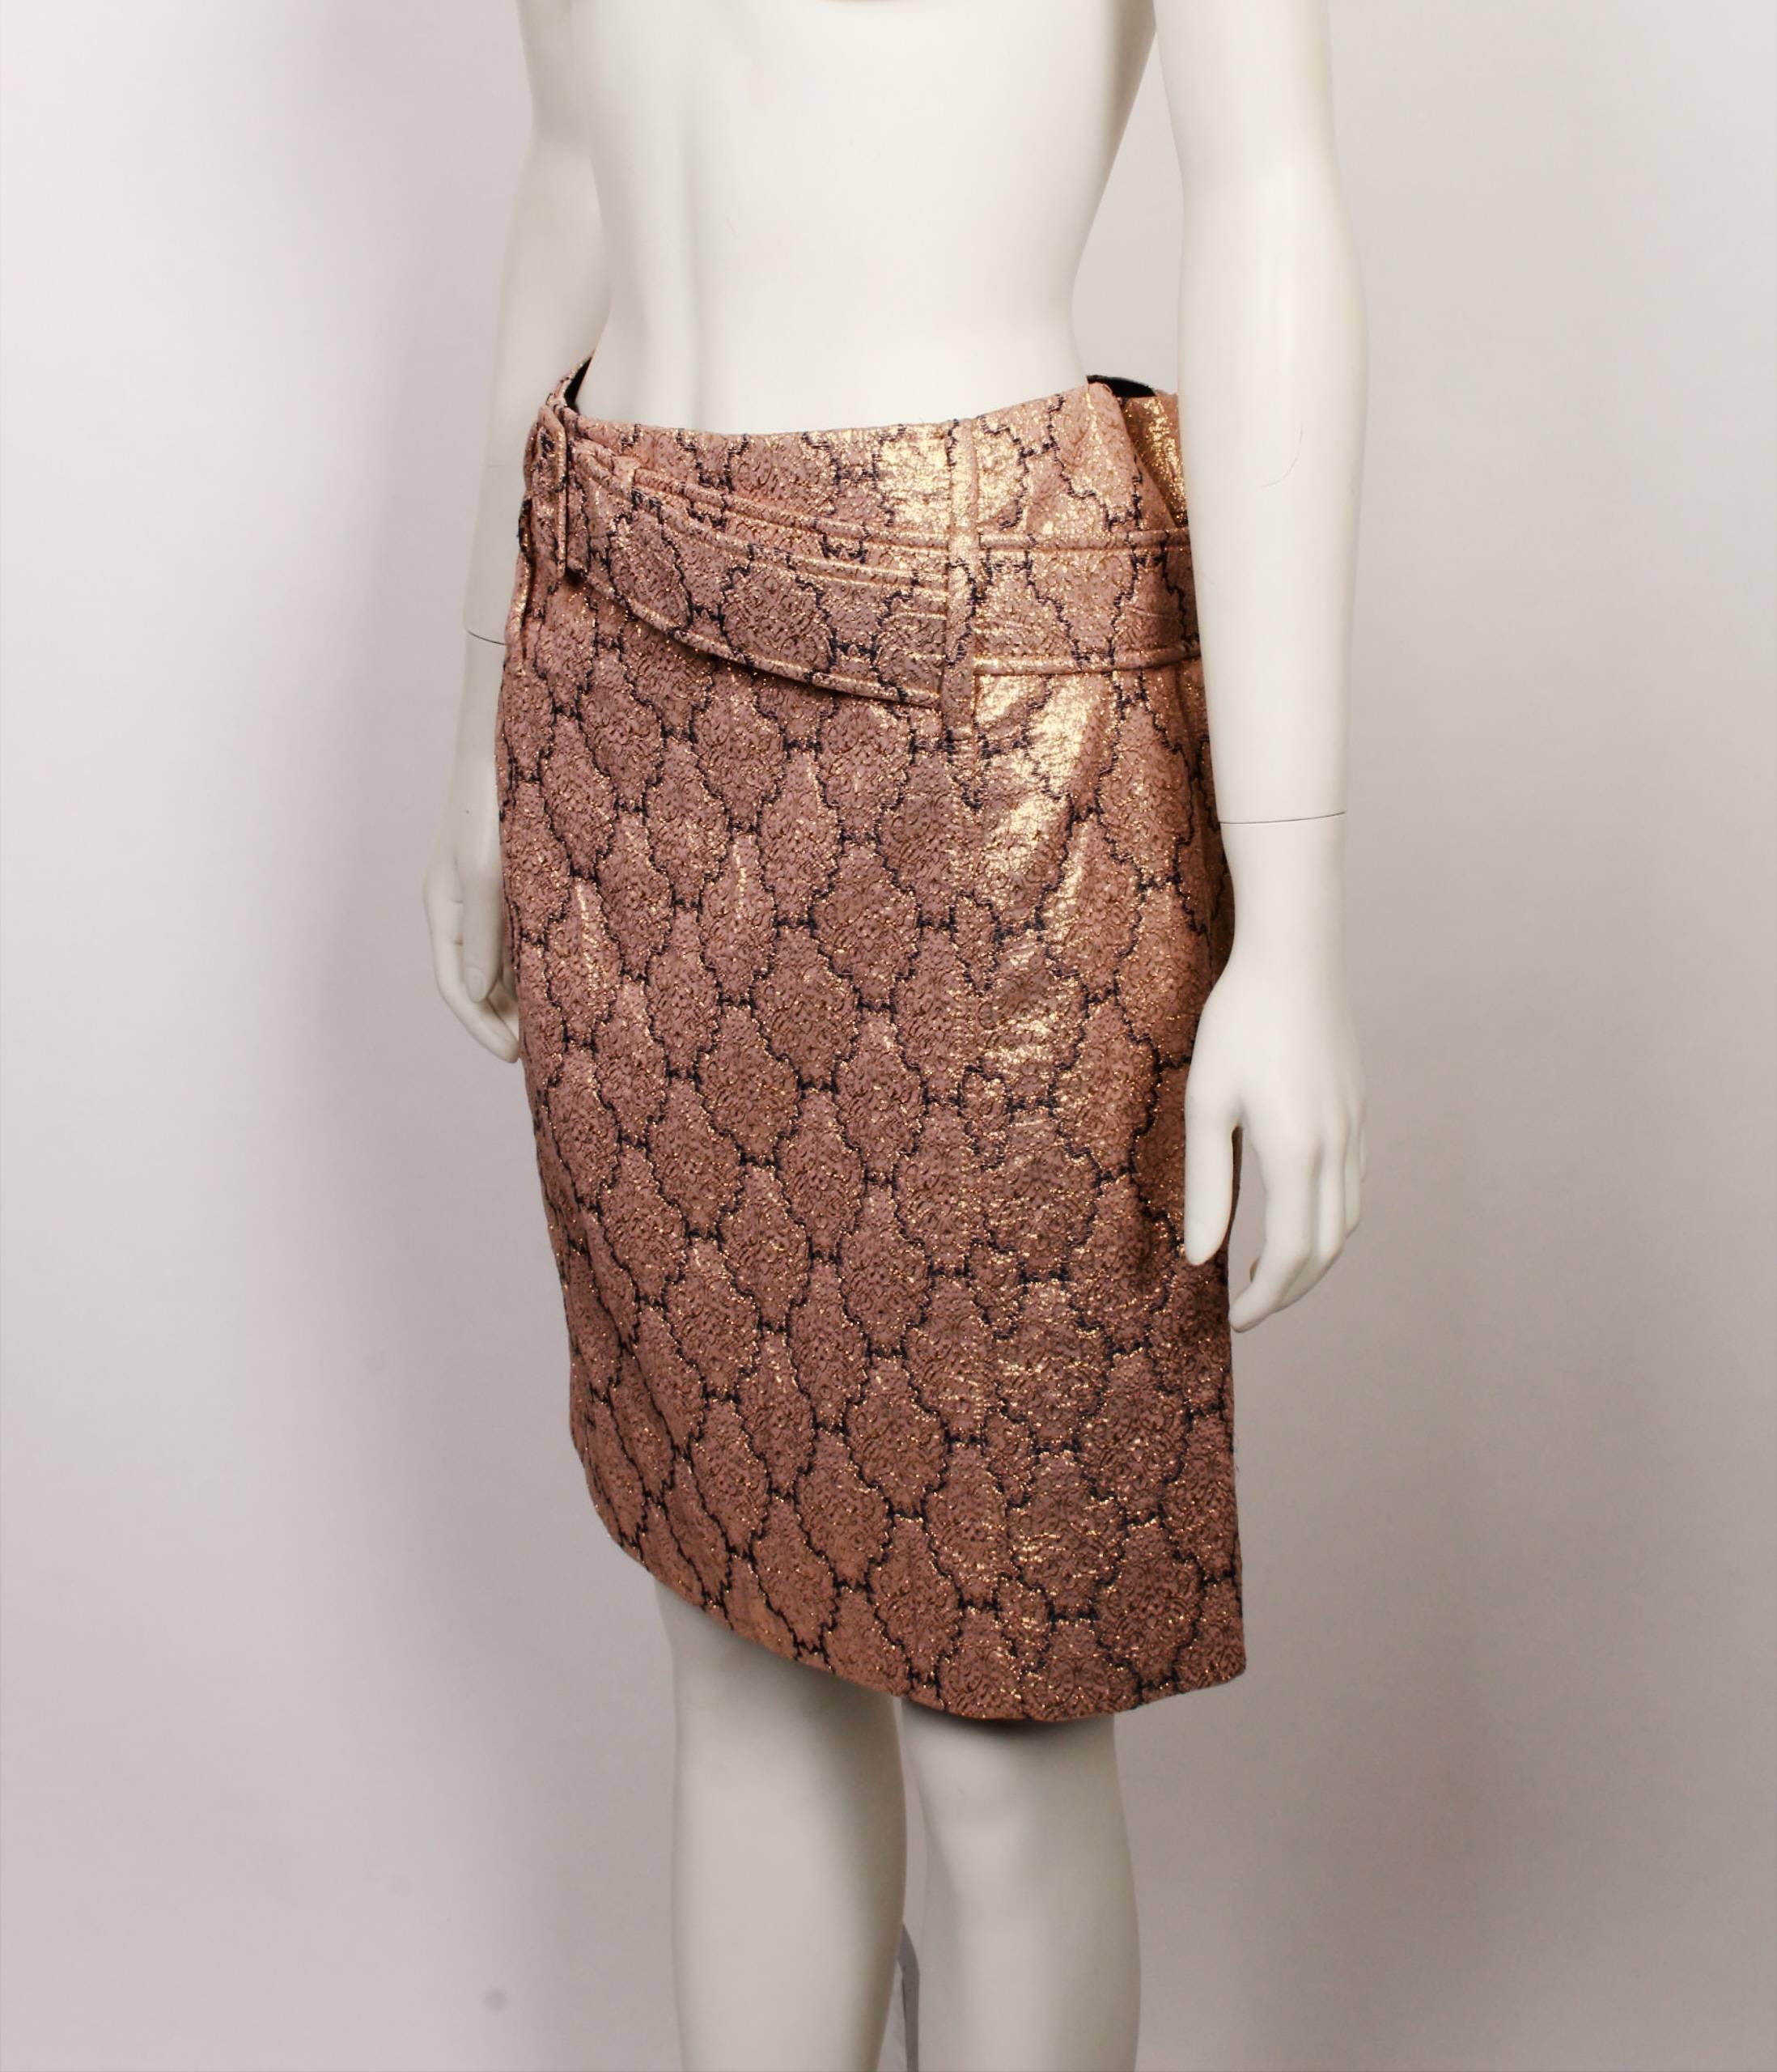 Statement Prada 1960's style skirt in gold wallpaper patterned textured Lame'.
A line silhouette with belt loops and waist/hip belt with self covered buckle. Invisible zip fastening. 
Made in Italy. Size 40.